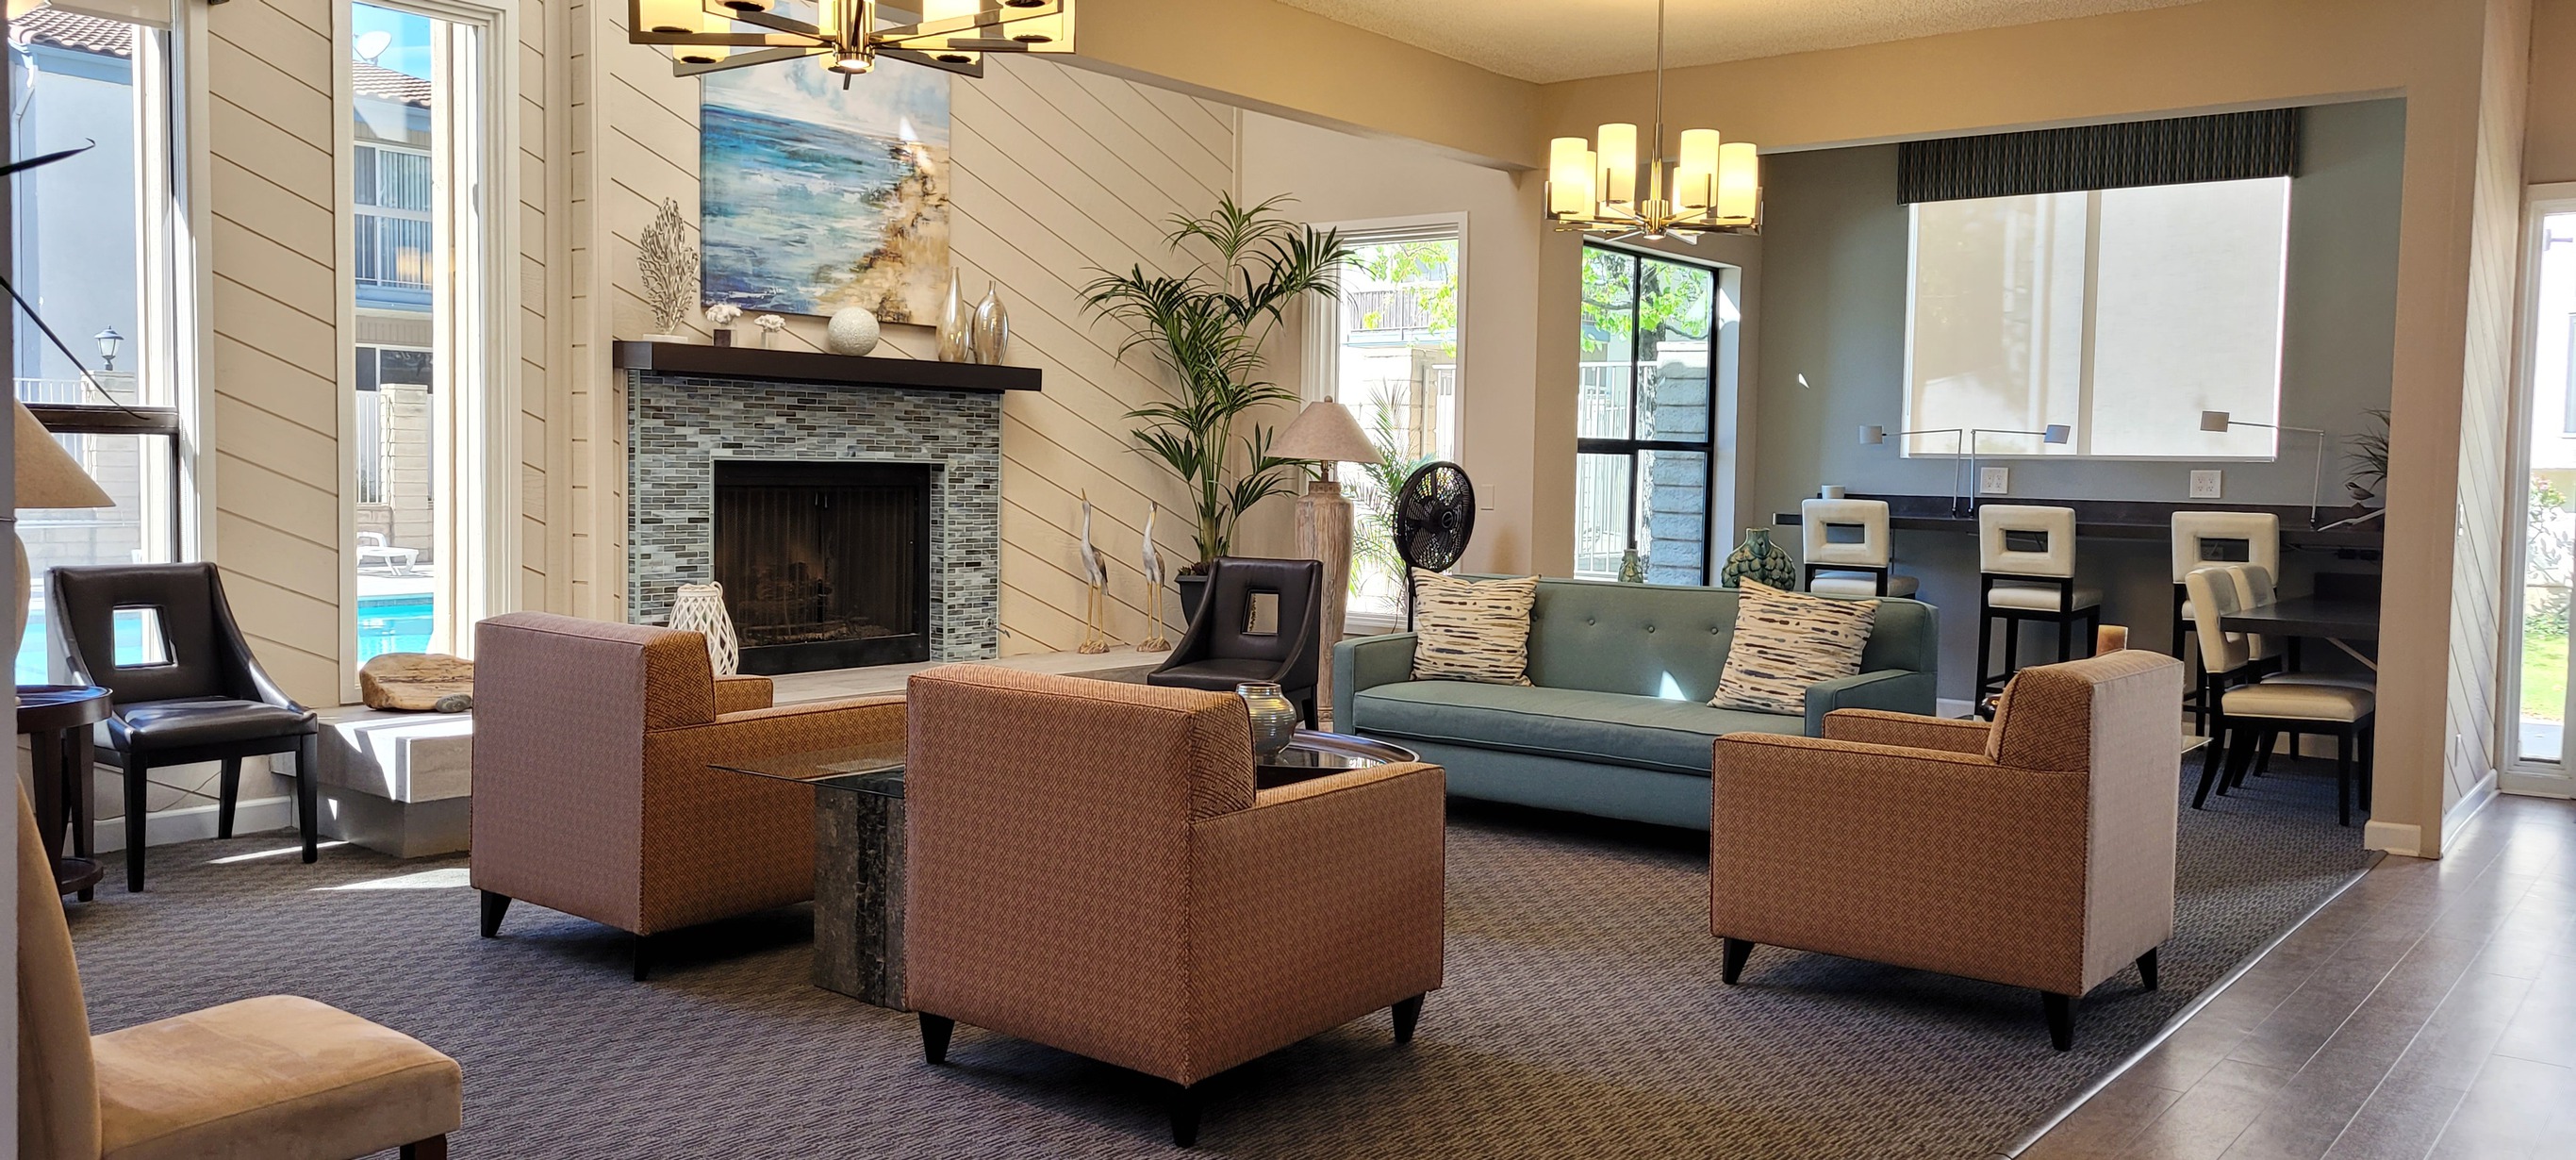 Ashwood Gardens community clubhouse with modern fireplace, office space and seating